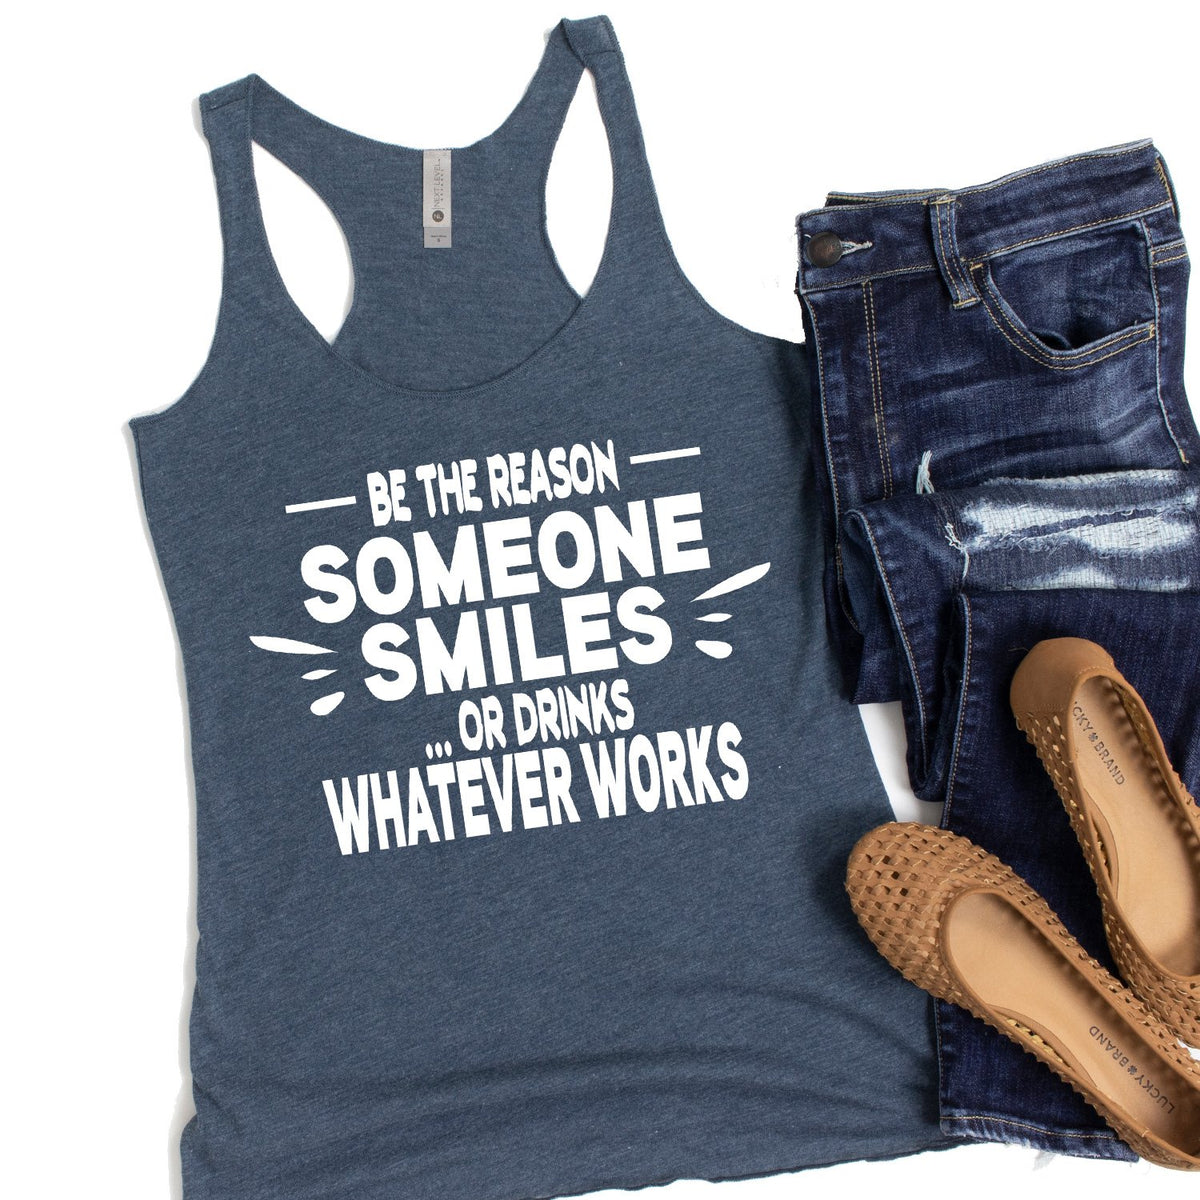 Be The Reason Someone Smiles Or Drinks Whatever Works - Tank Top Racerback